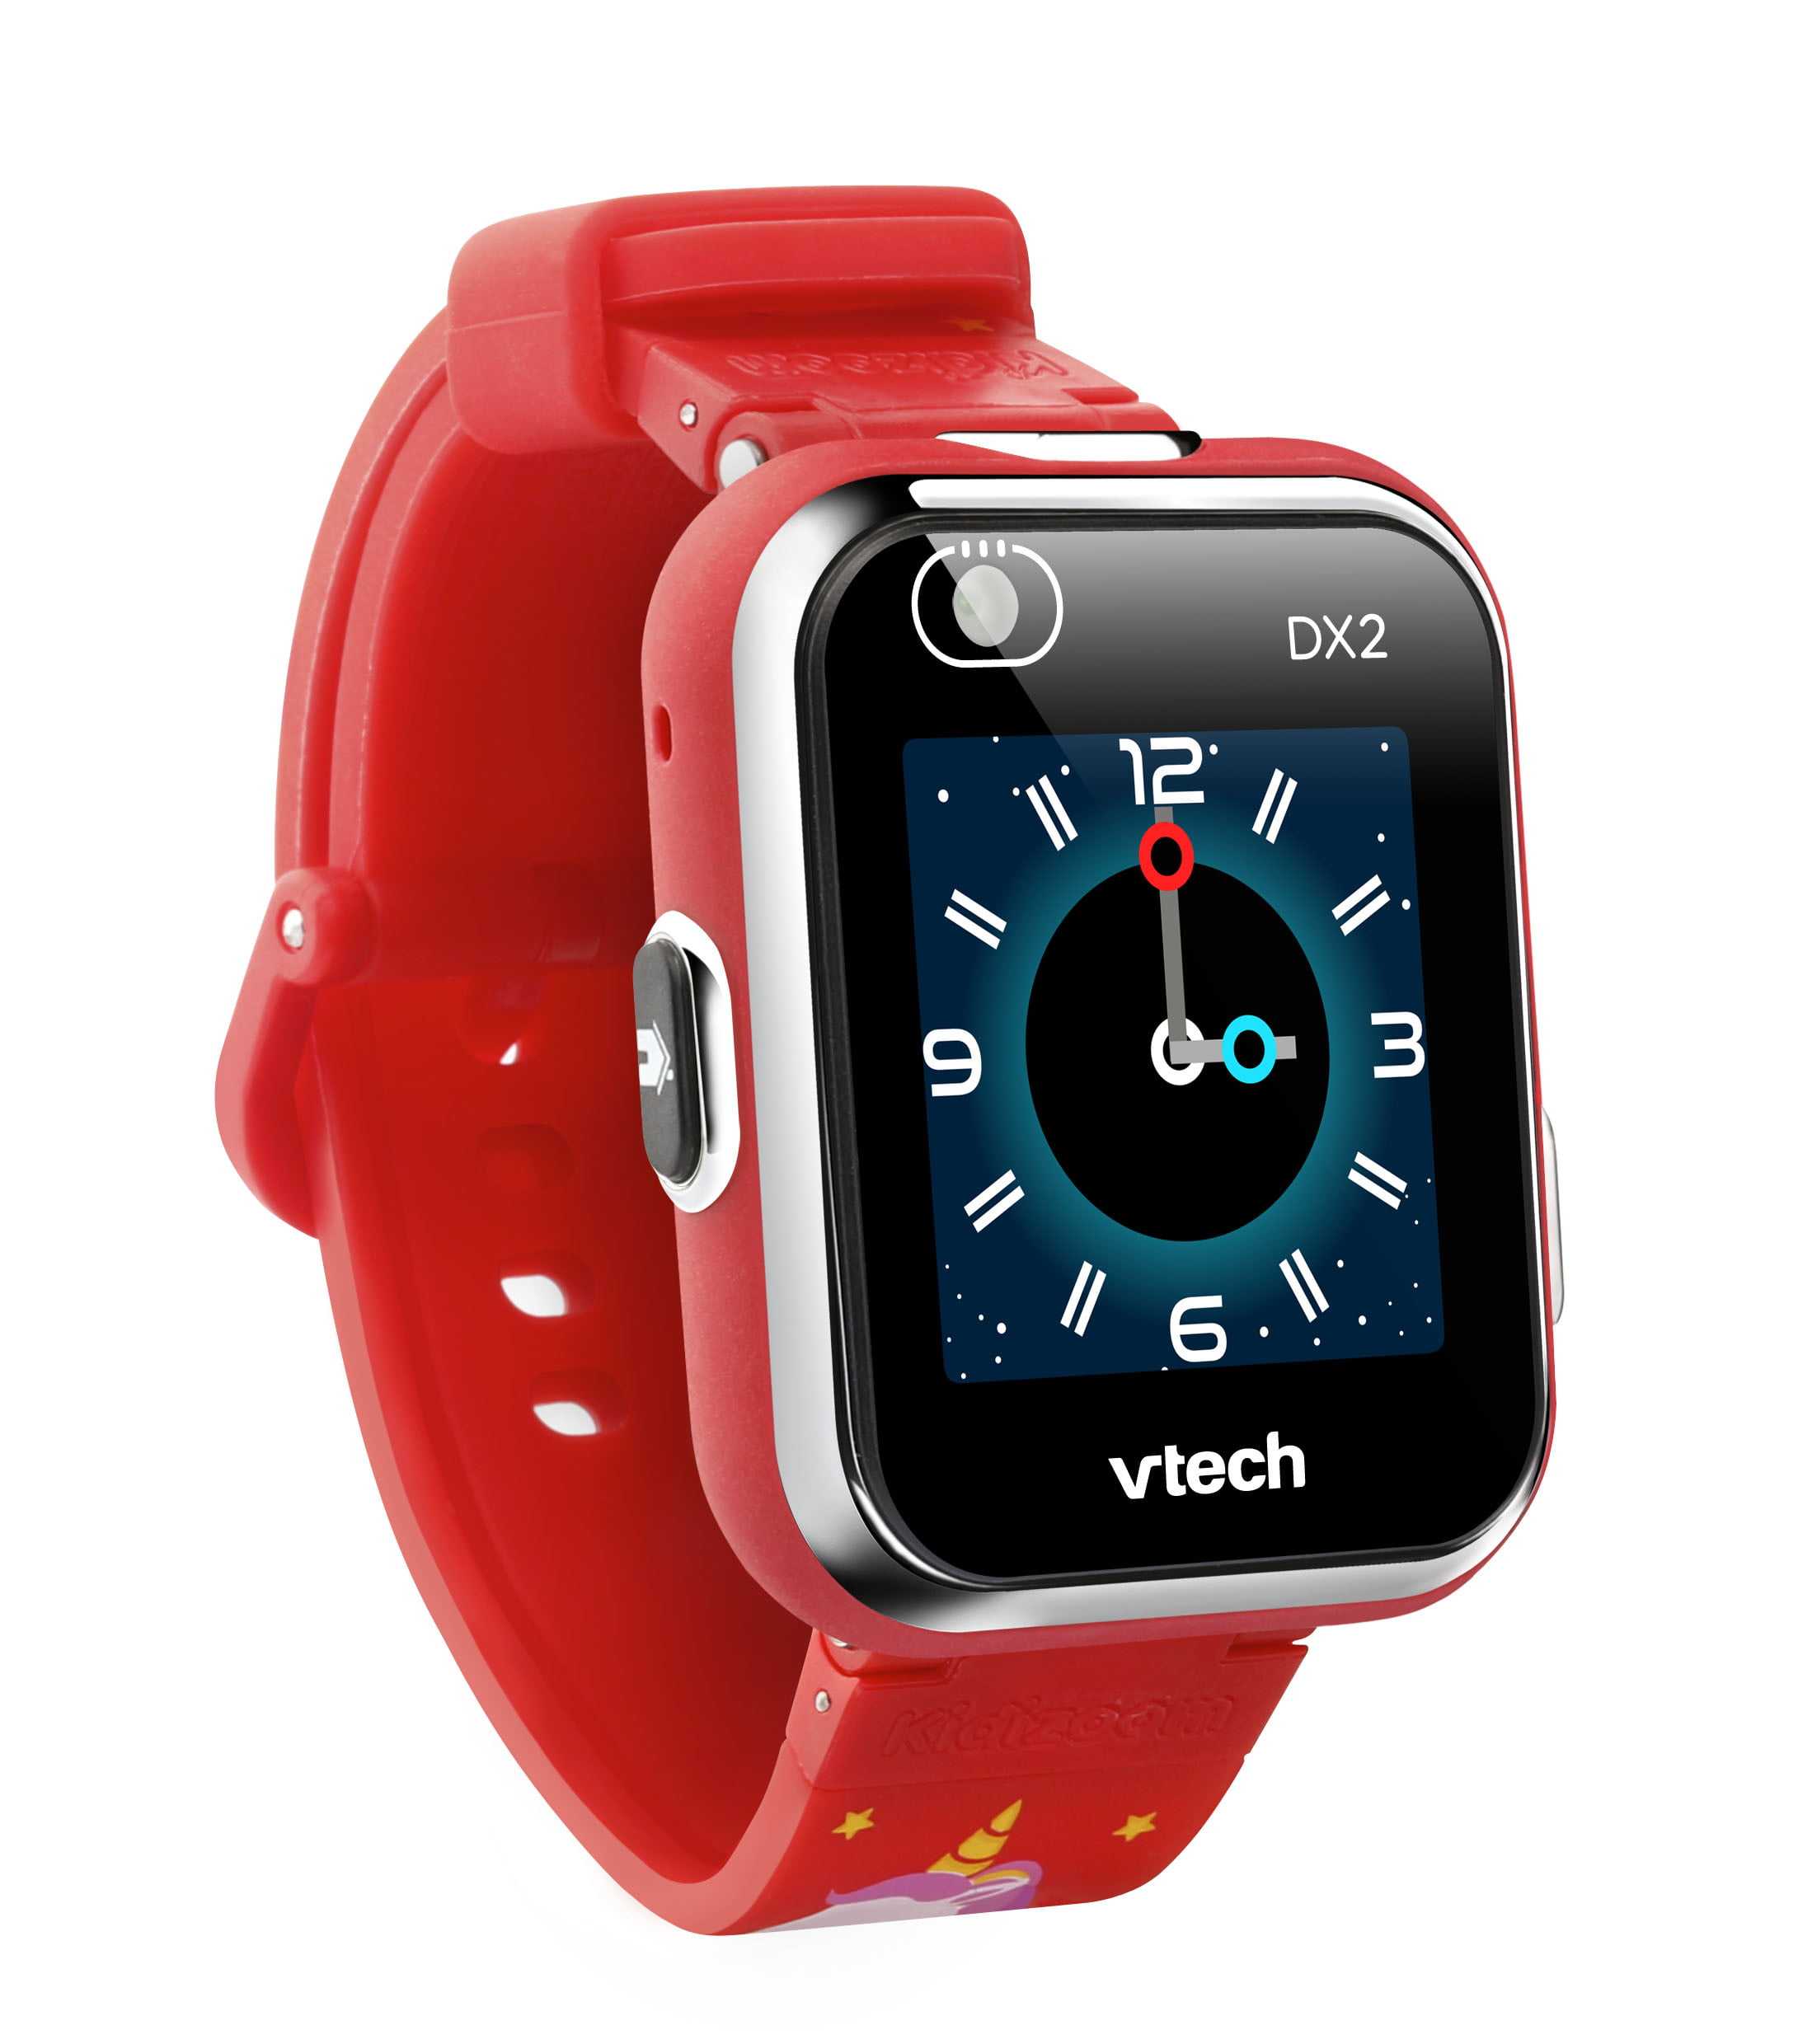 NEW IN BOX! VTech Kidizoom Smartwatch DX2 Special Exclusive Red Unicorn Edition 